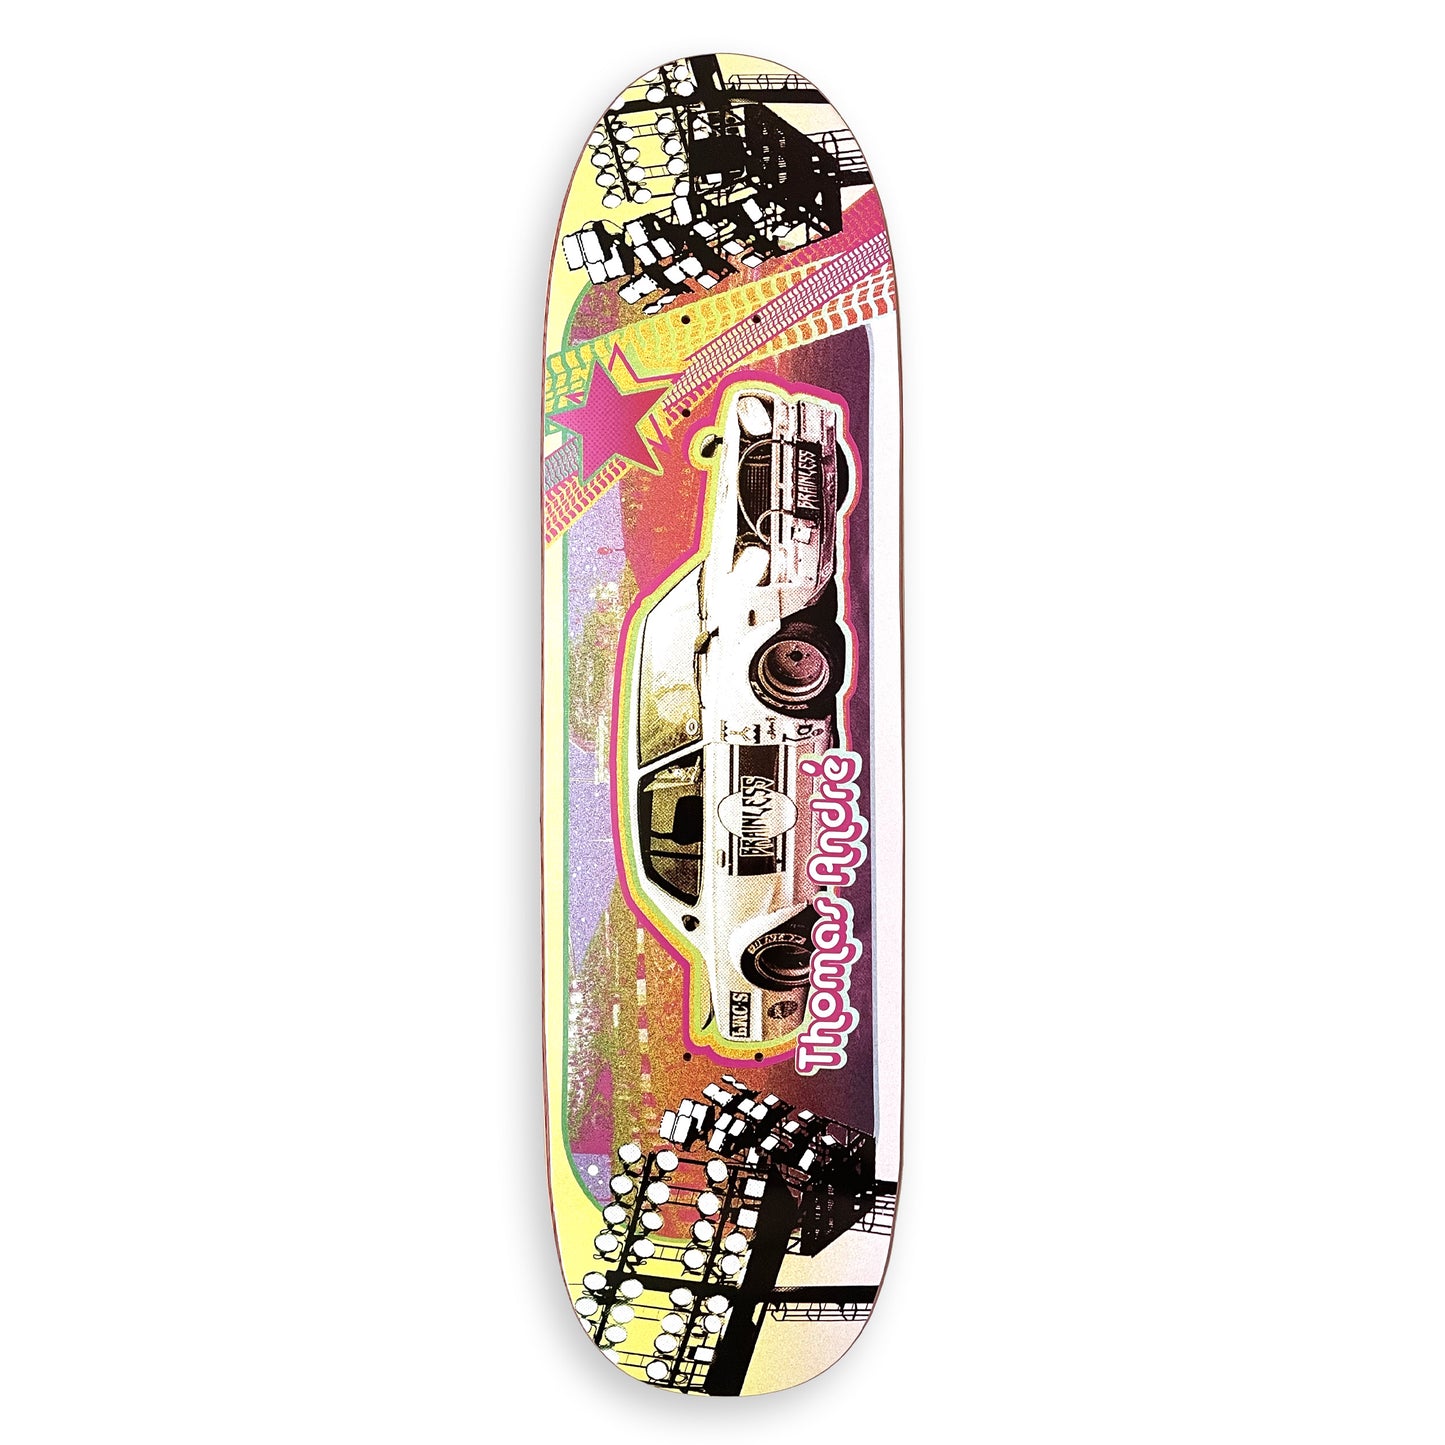 Brainless skateboards King of the Road Thomas André 8.5"